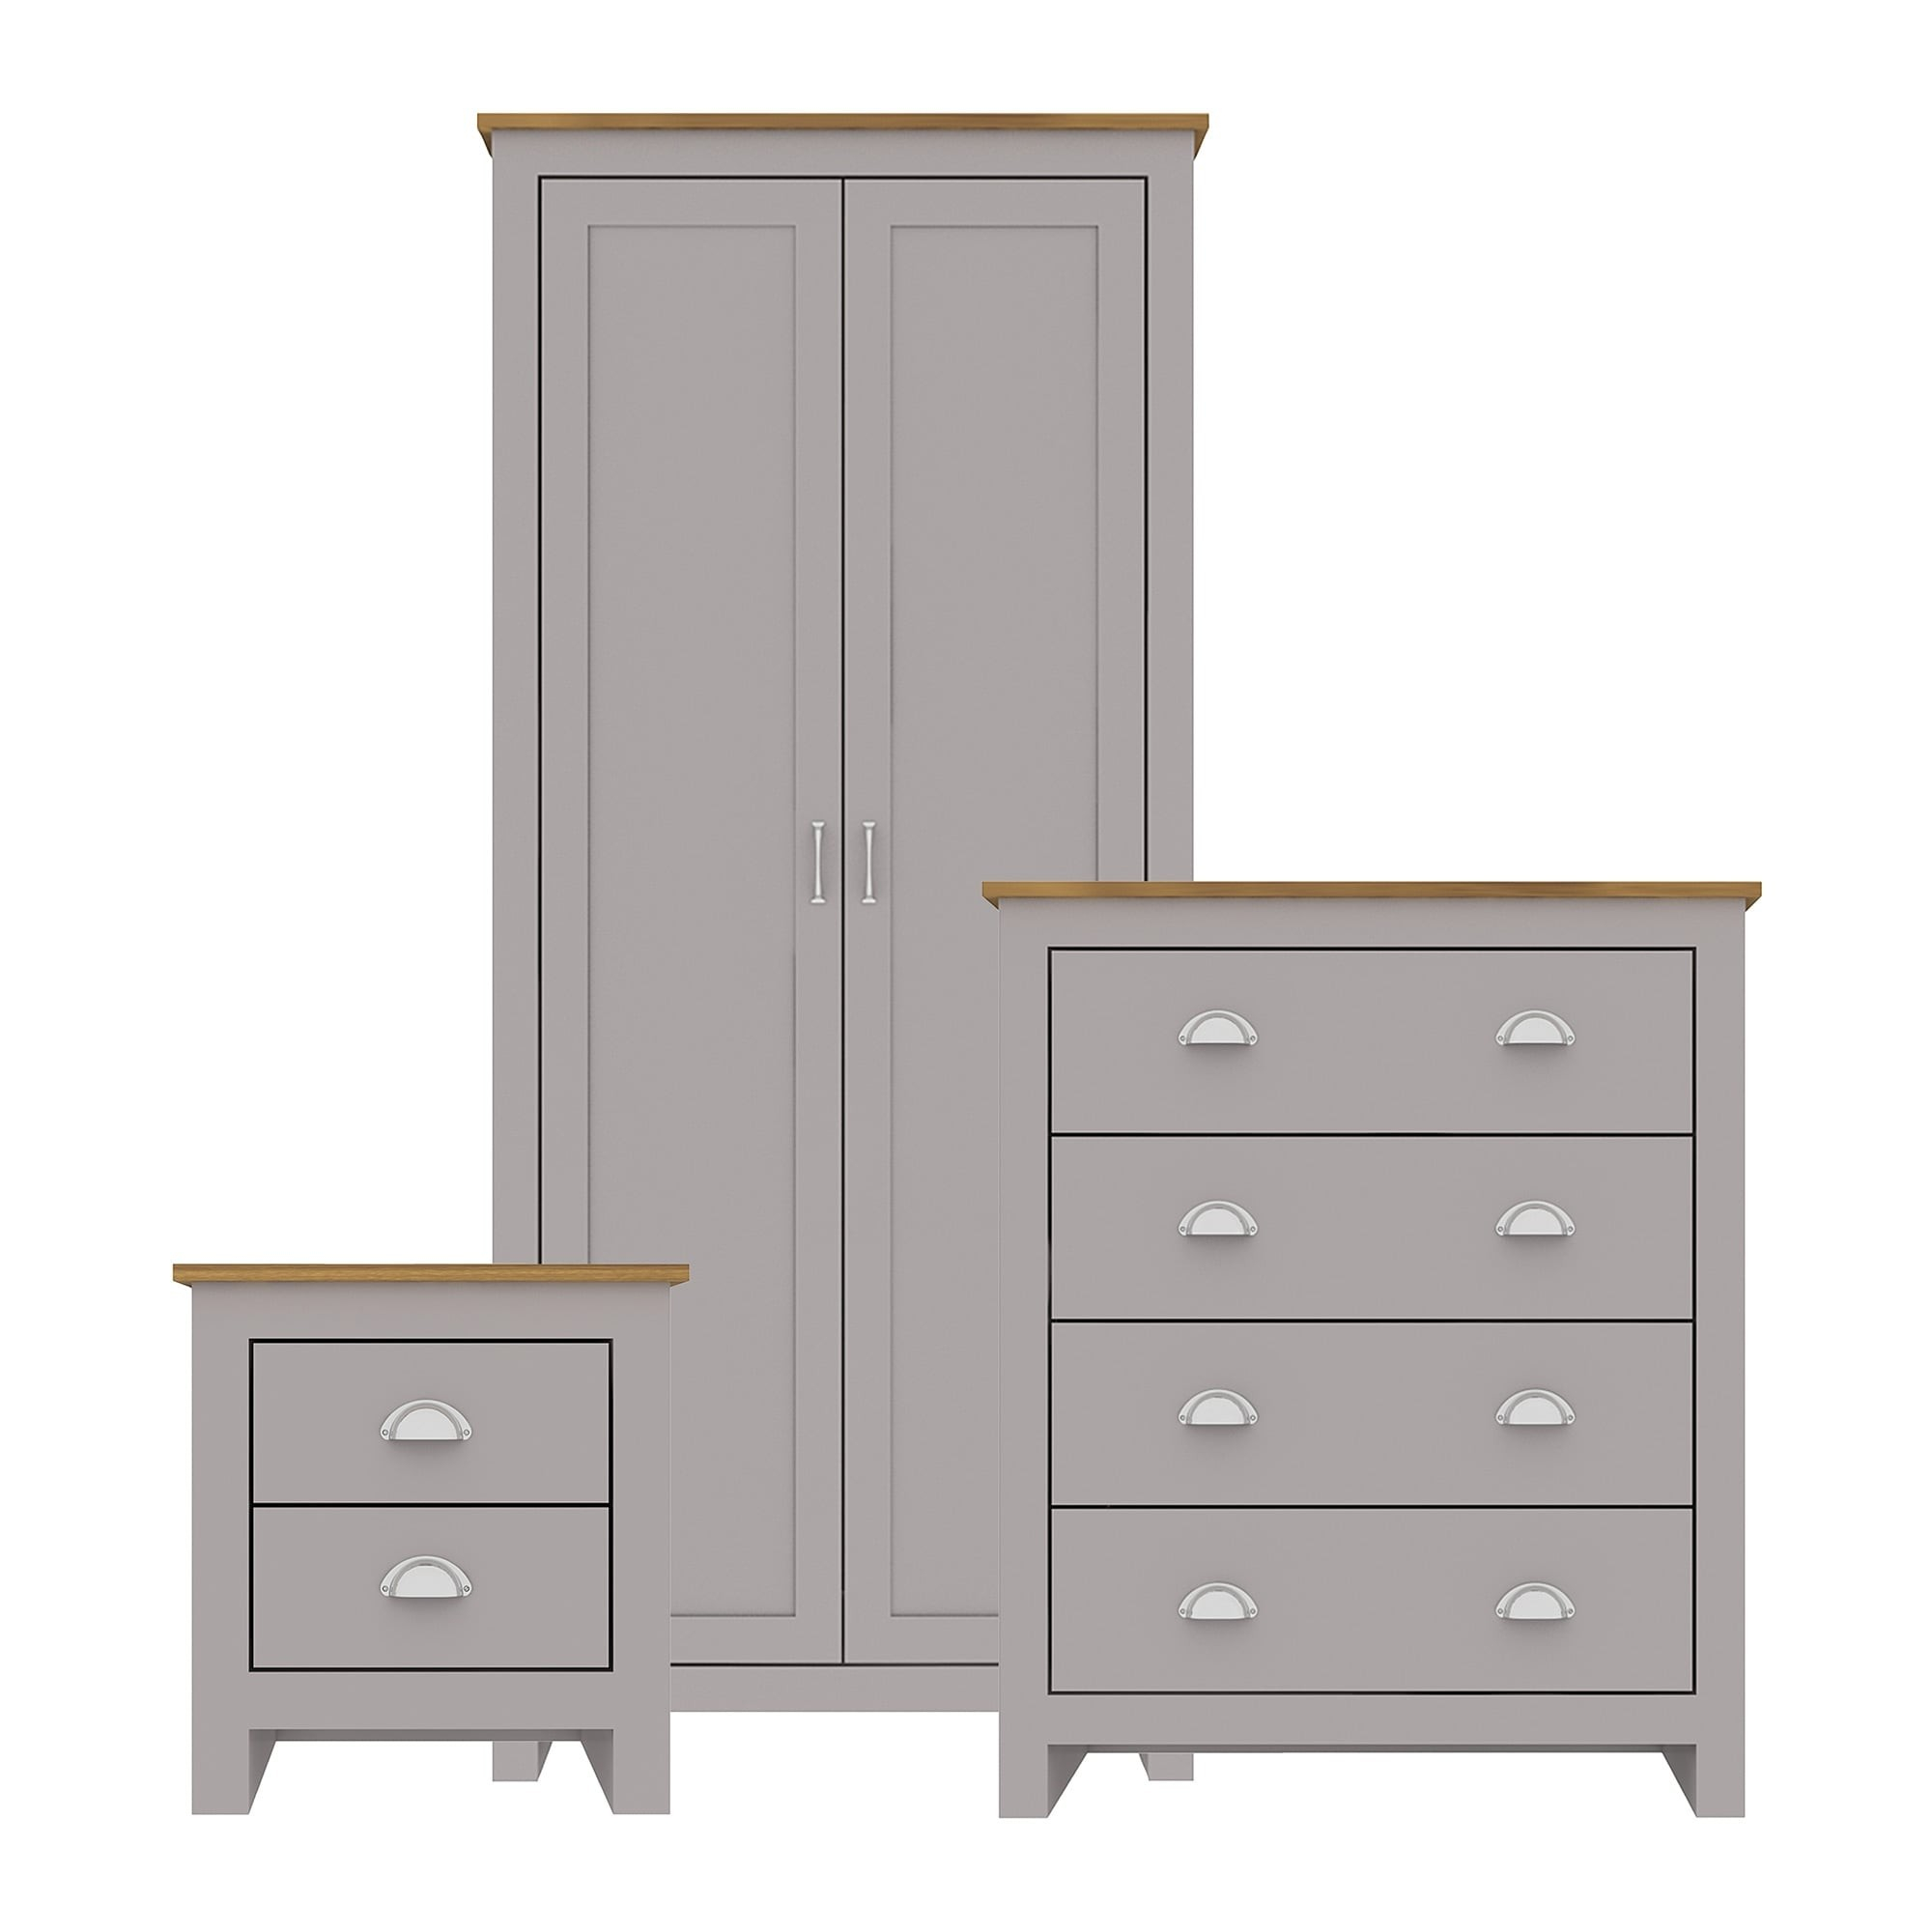 Lpd Furniture Lancaster 3 Piece Bedroom Furniture Set within dimensions 2000 X 2000